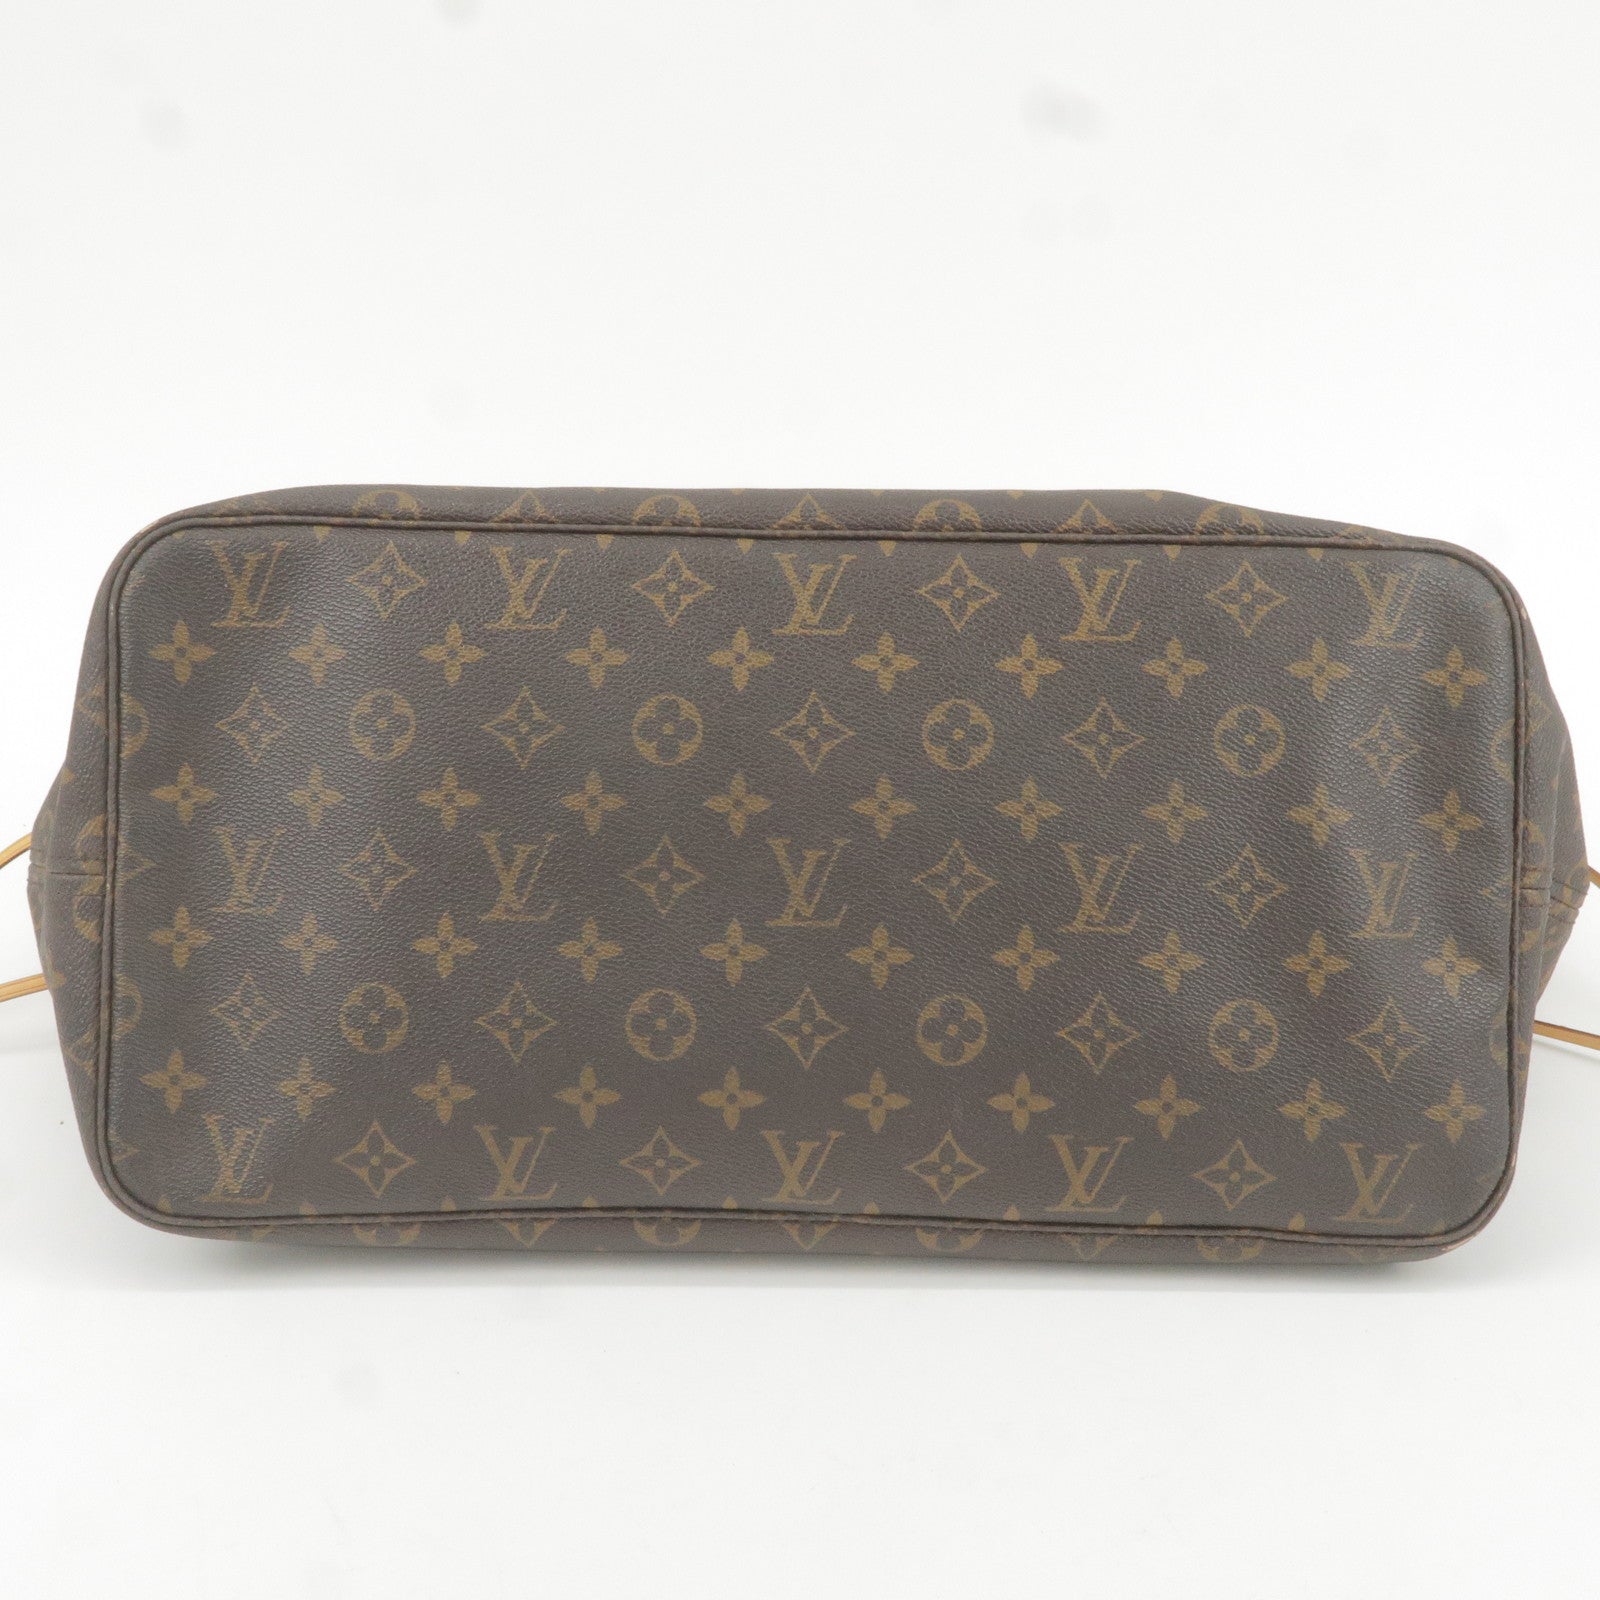 Louis Vuitton Pre-loved Monogram Daily Pouch